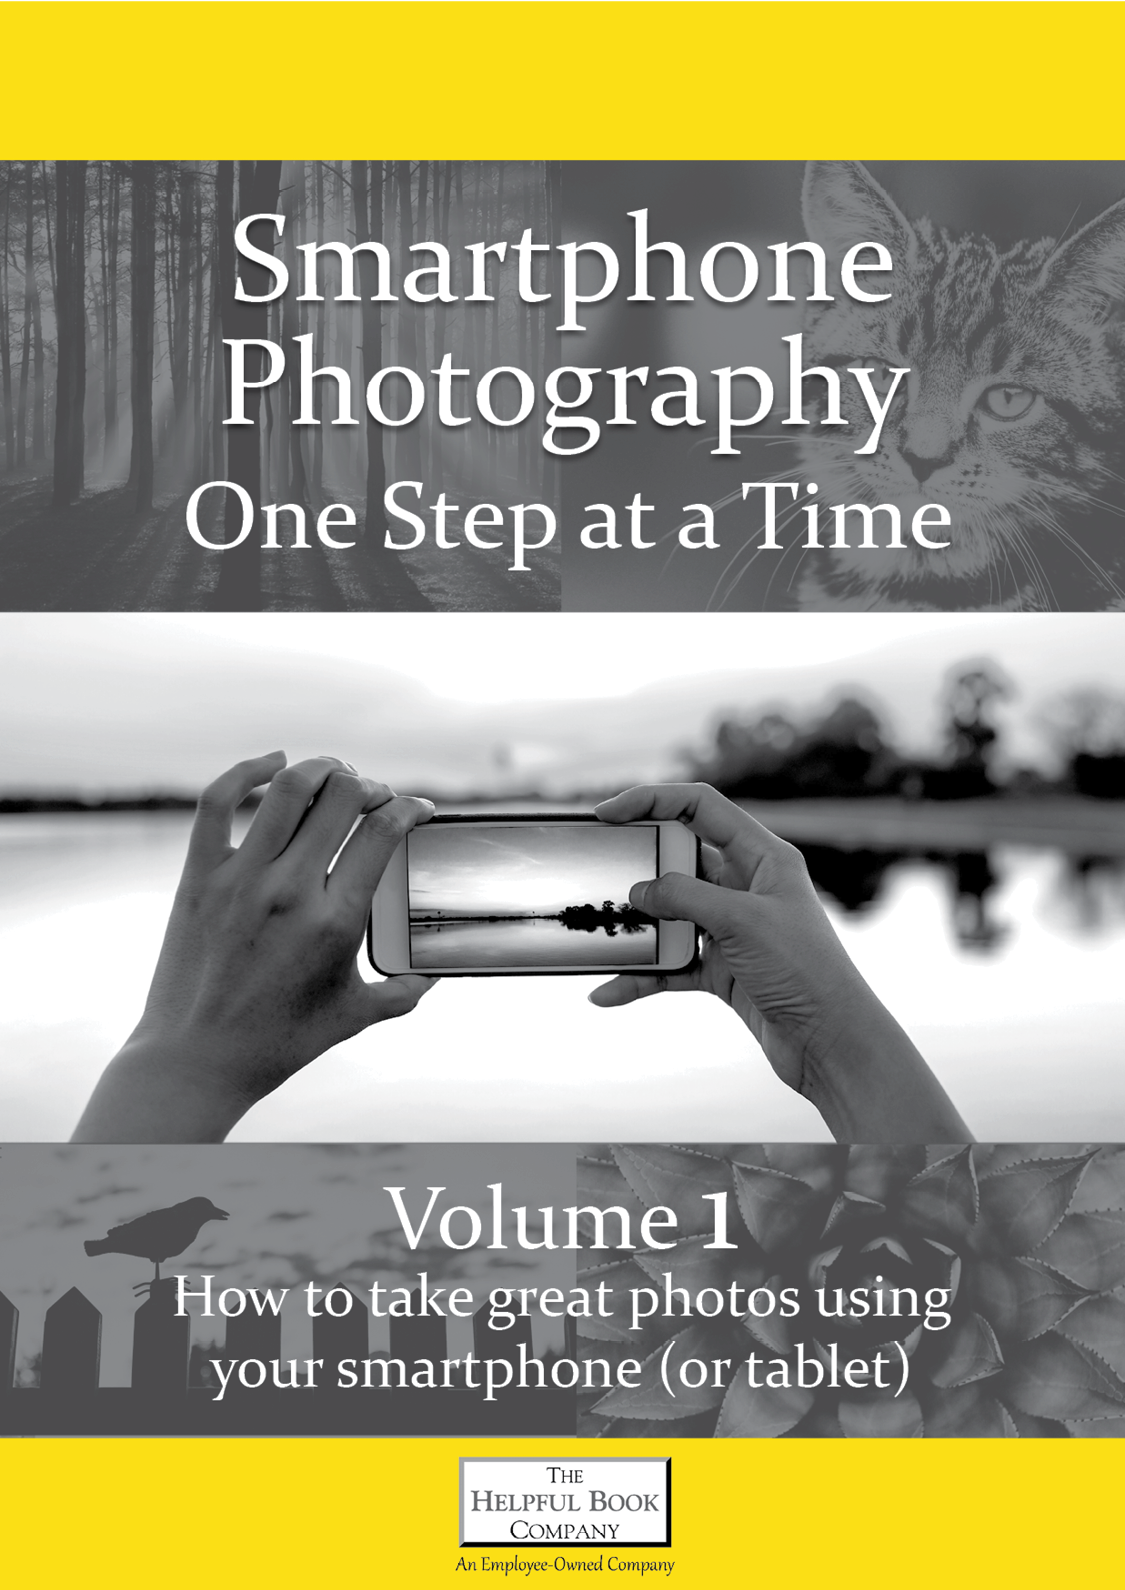 Smartphone Photography One Step at a Time volume one